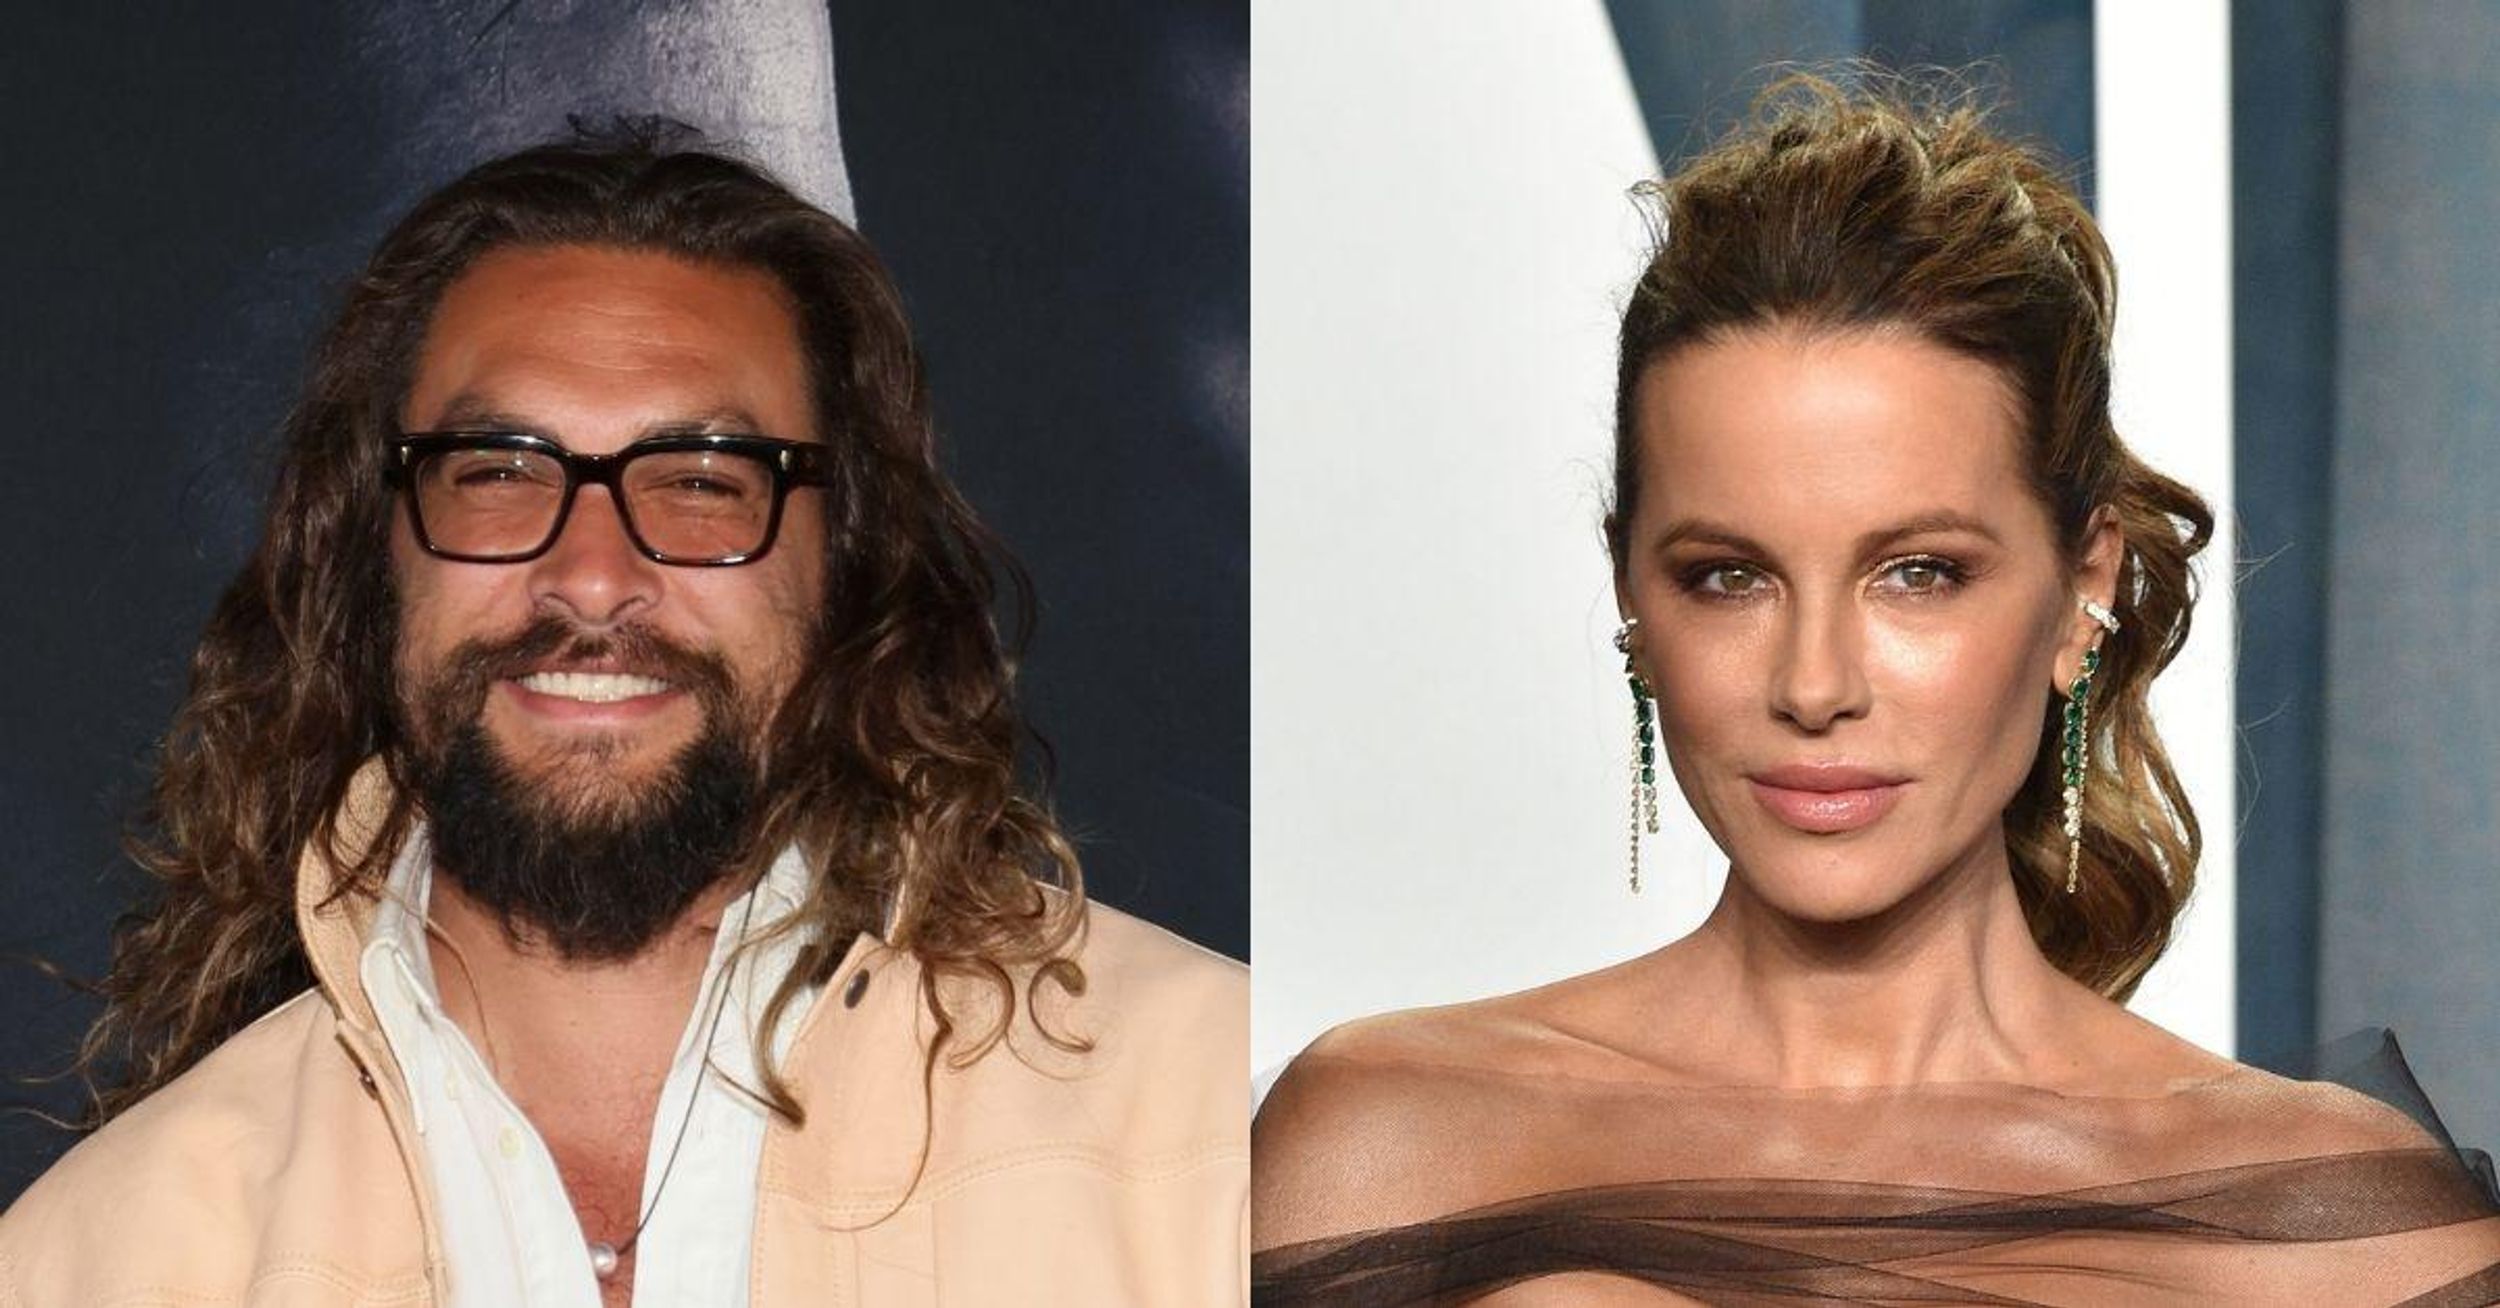 Jason Momoa Sets The Record Straight After He Was Spotted Cozying Up To Kate Beckinsale